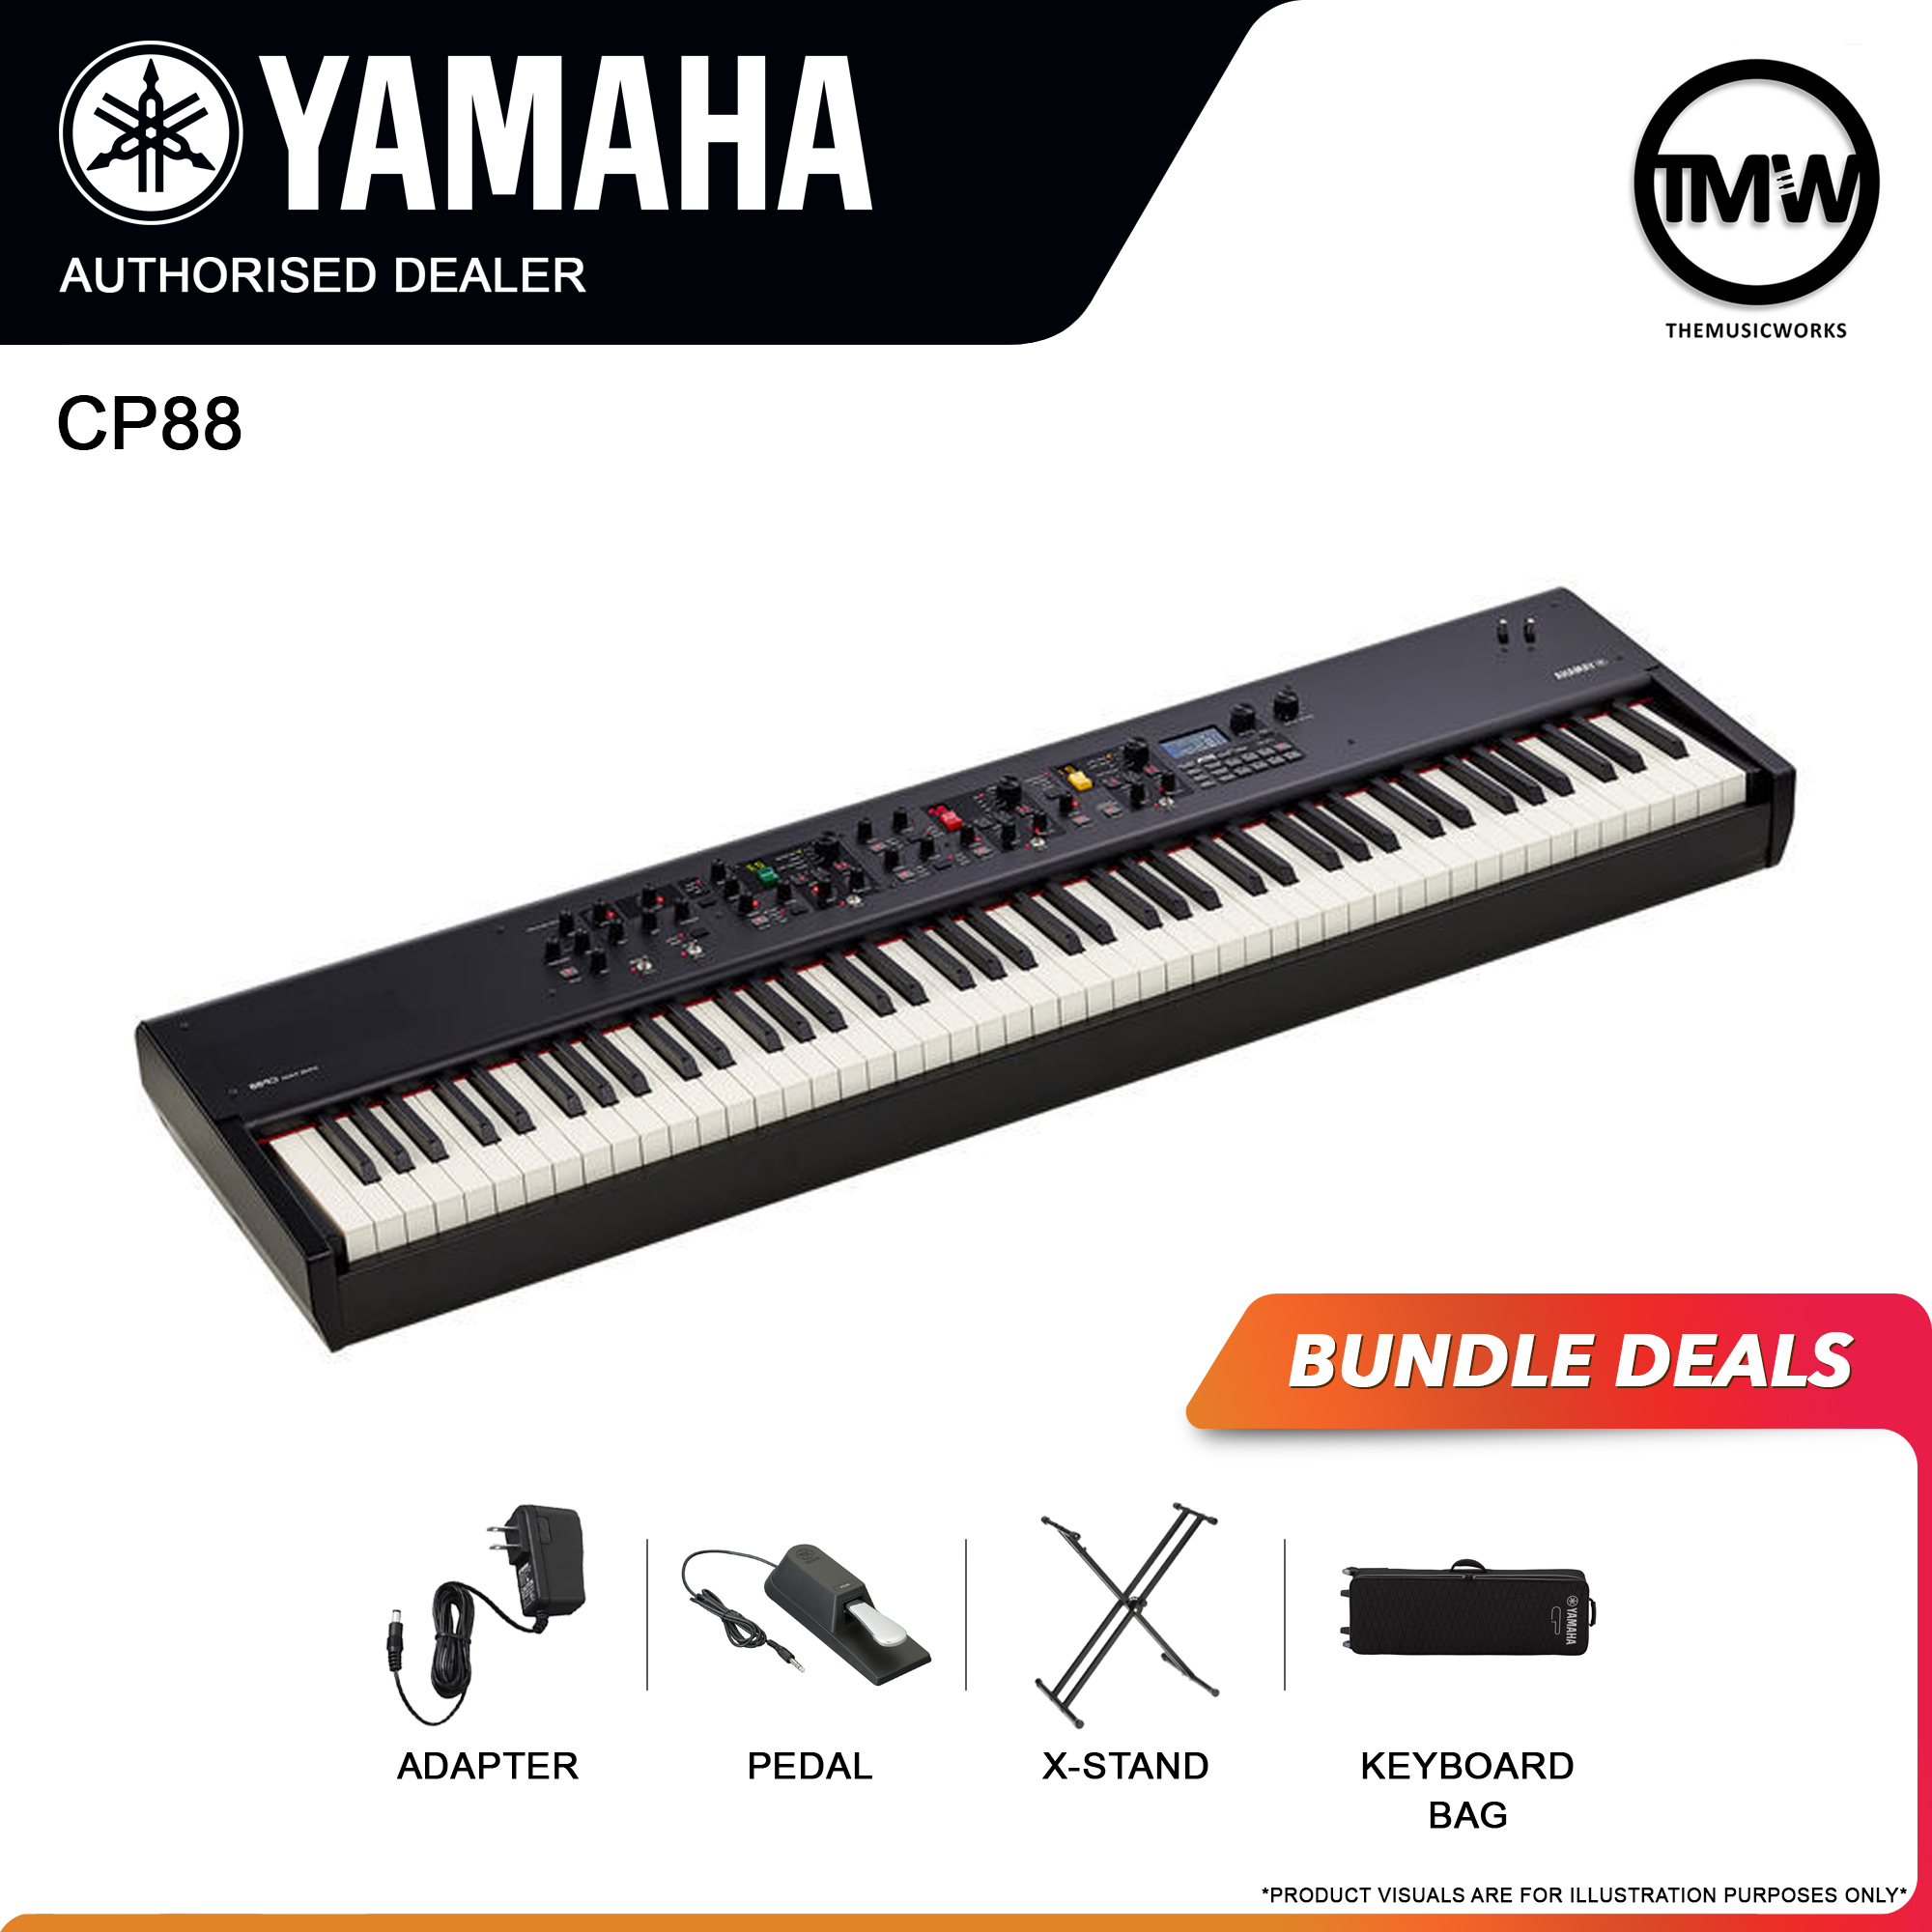 yamaha cp88 with adapter, pedal, x-stand, and keyboard bag